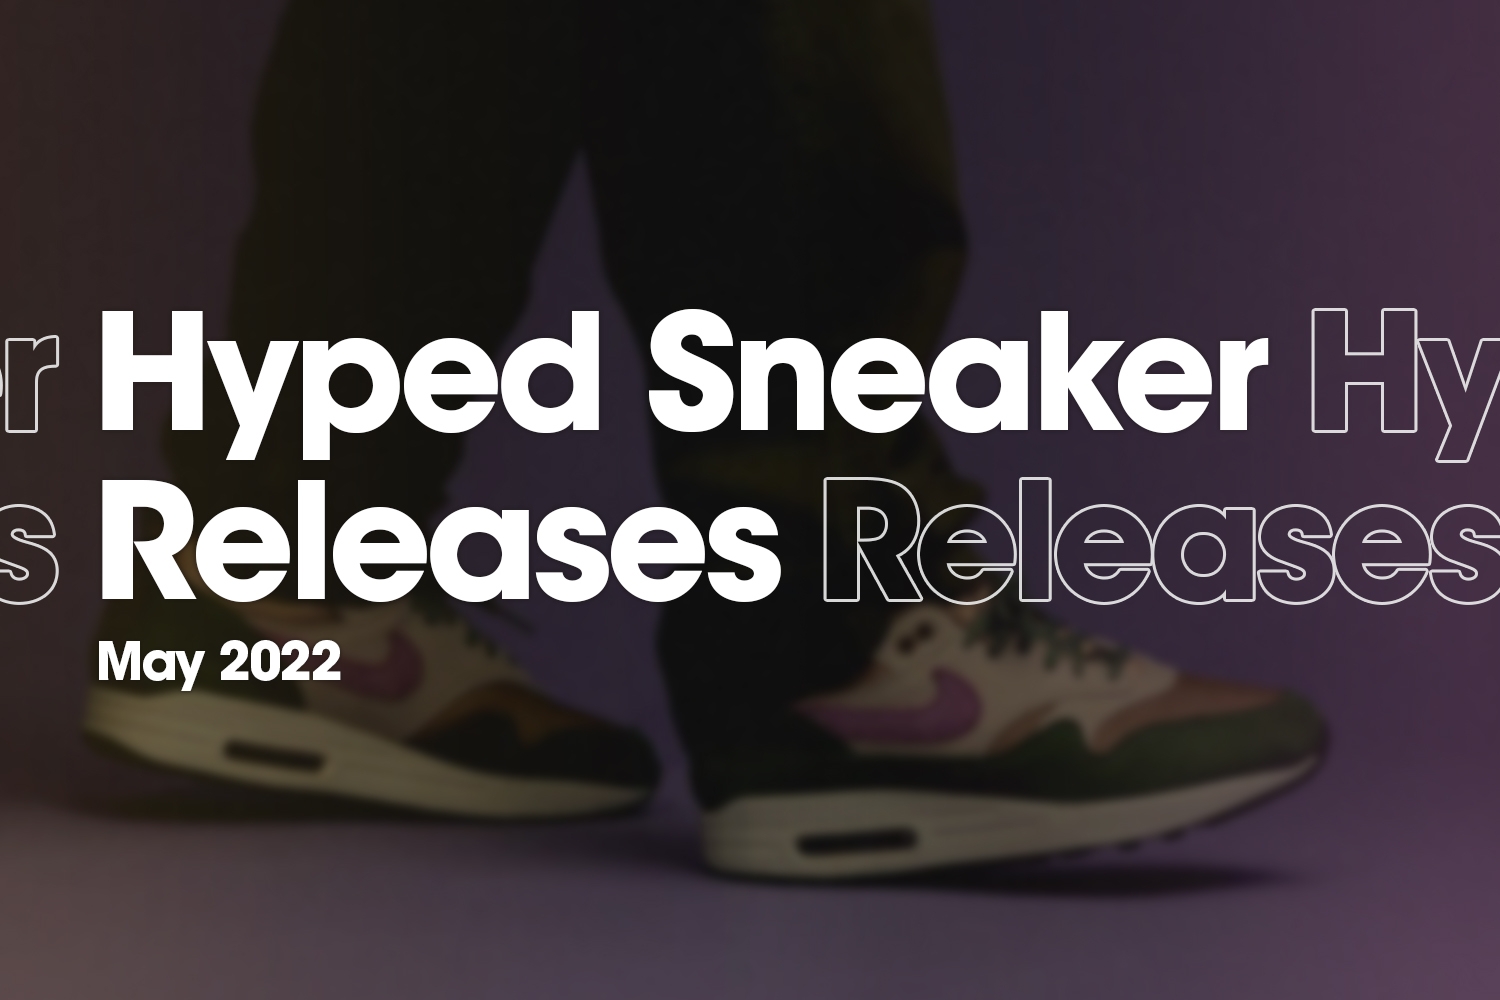 Hyped Sneaker Releases of May 2022